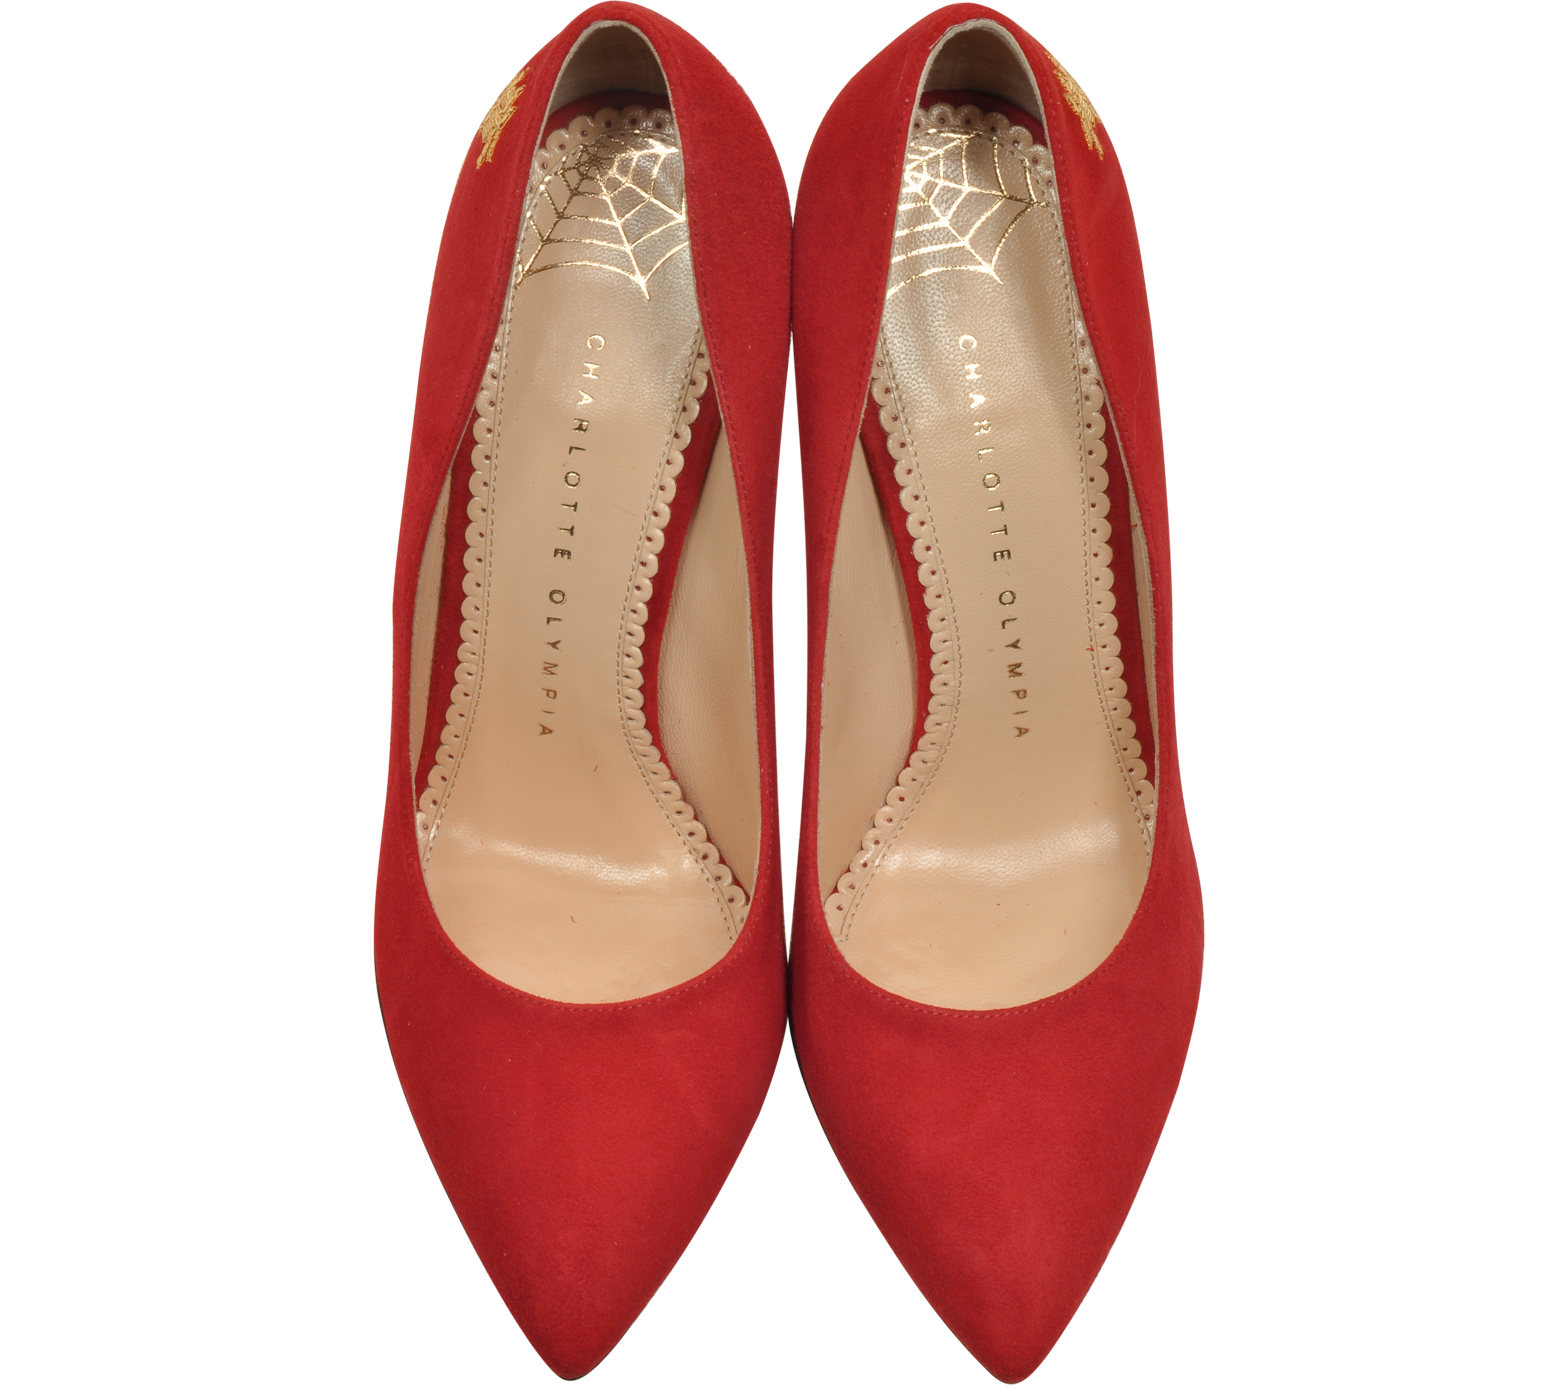 Charlotte Olympia Bacall Red Suede Pump 35 IT/EU at FORZIERI